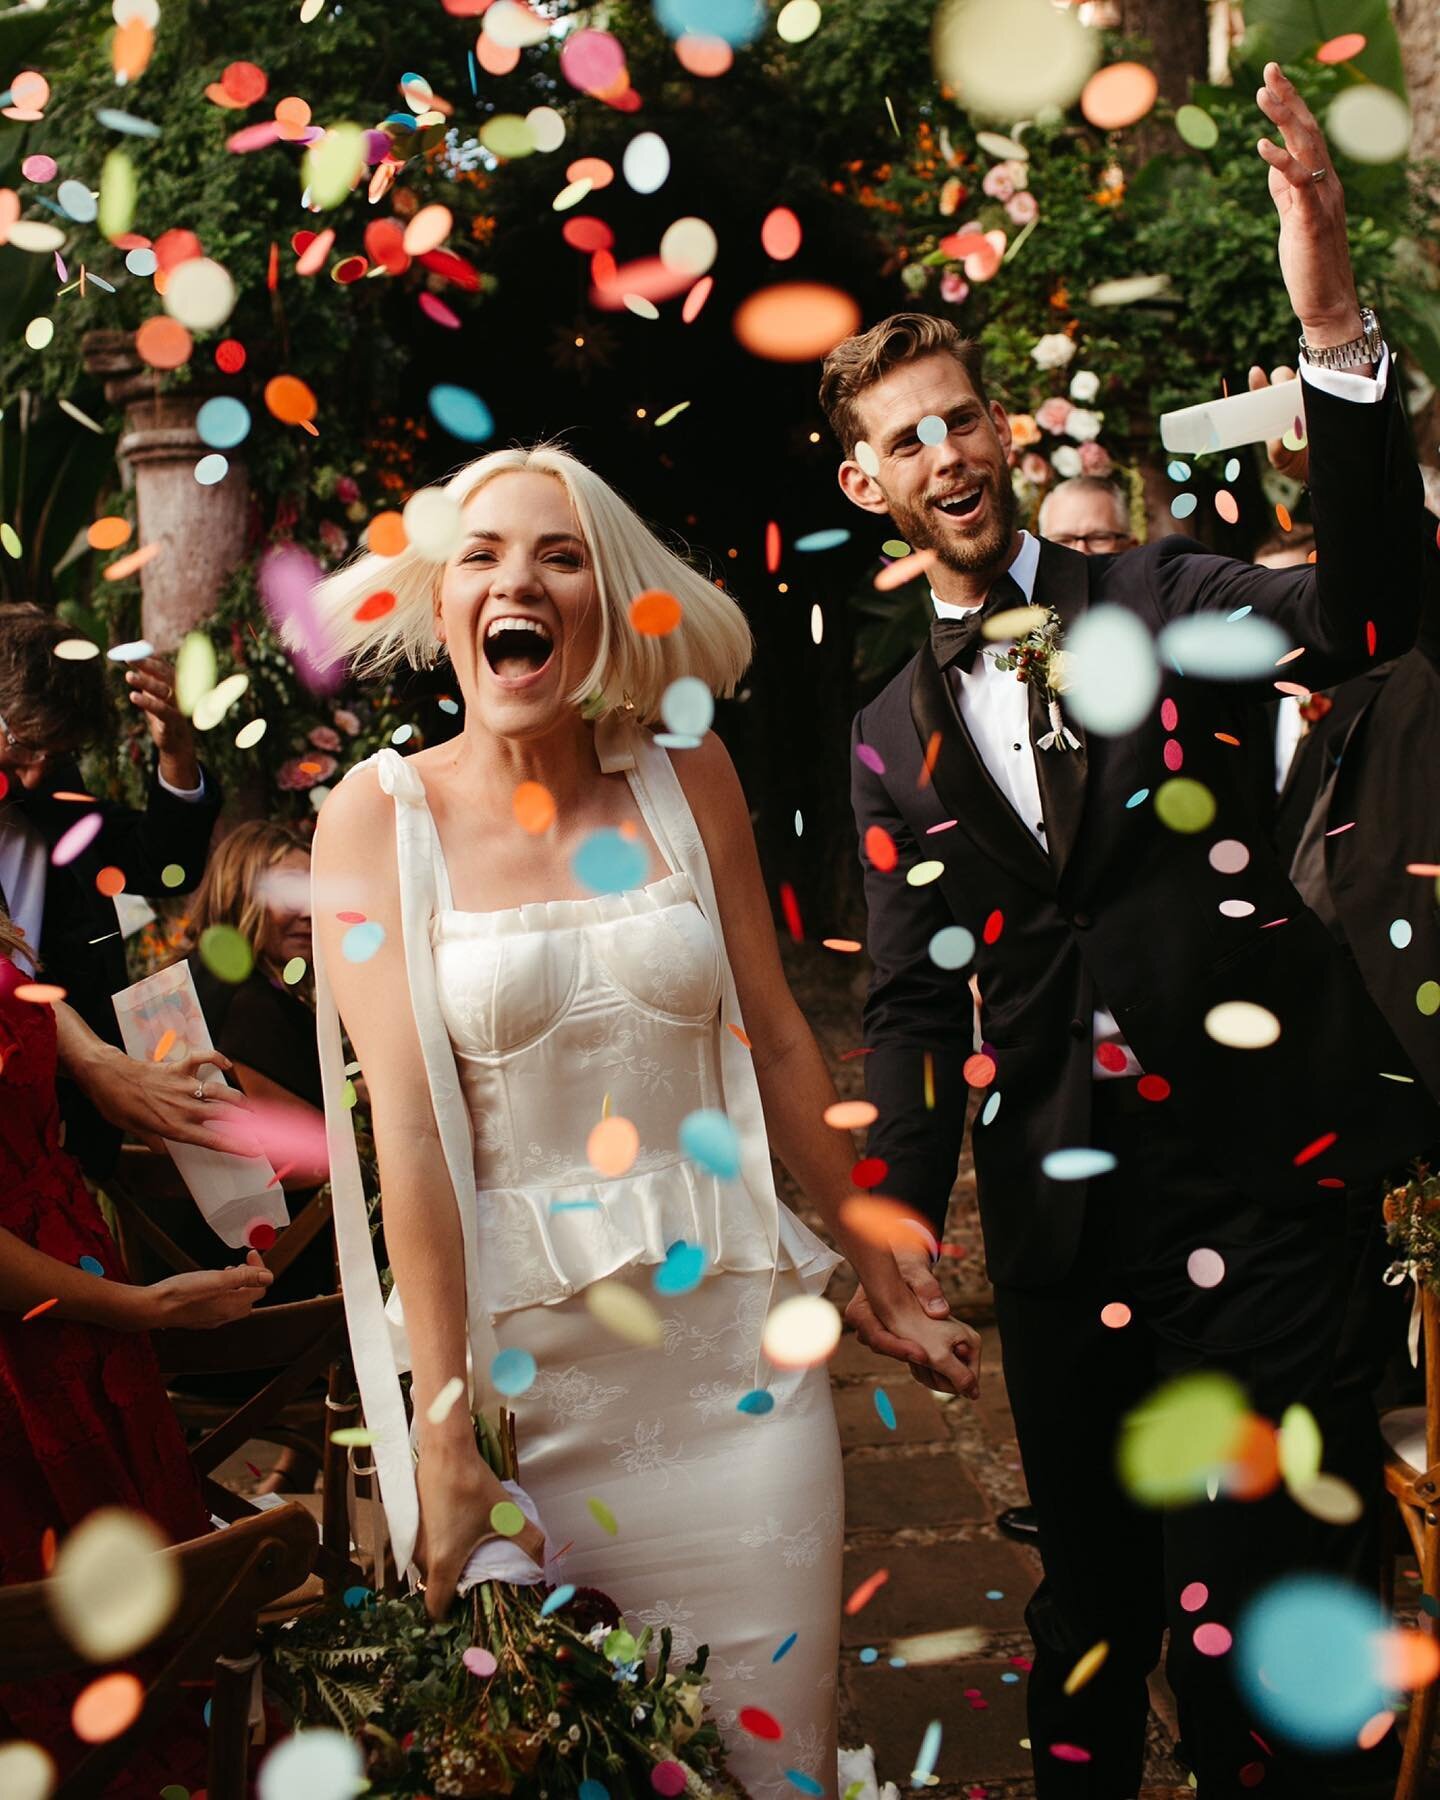 This confetti filled celebration just got FEATURED ON @junebugweddings 🎉! From the charming cobblestone streets and colonial architecture to the intimate candlelit dinner beneath lush greenery and palm trees, @josie.george + @robertparkerhomes lovef